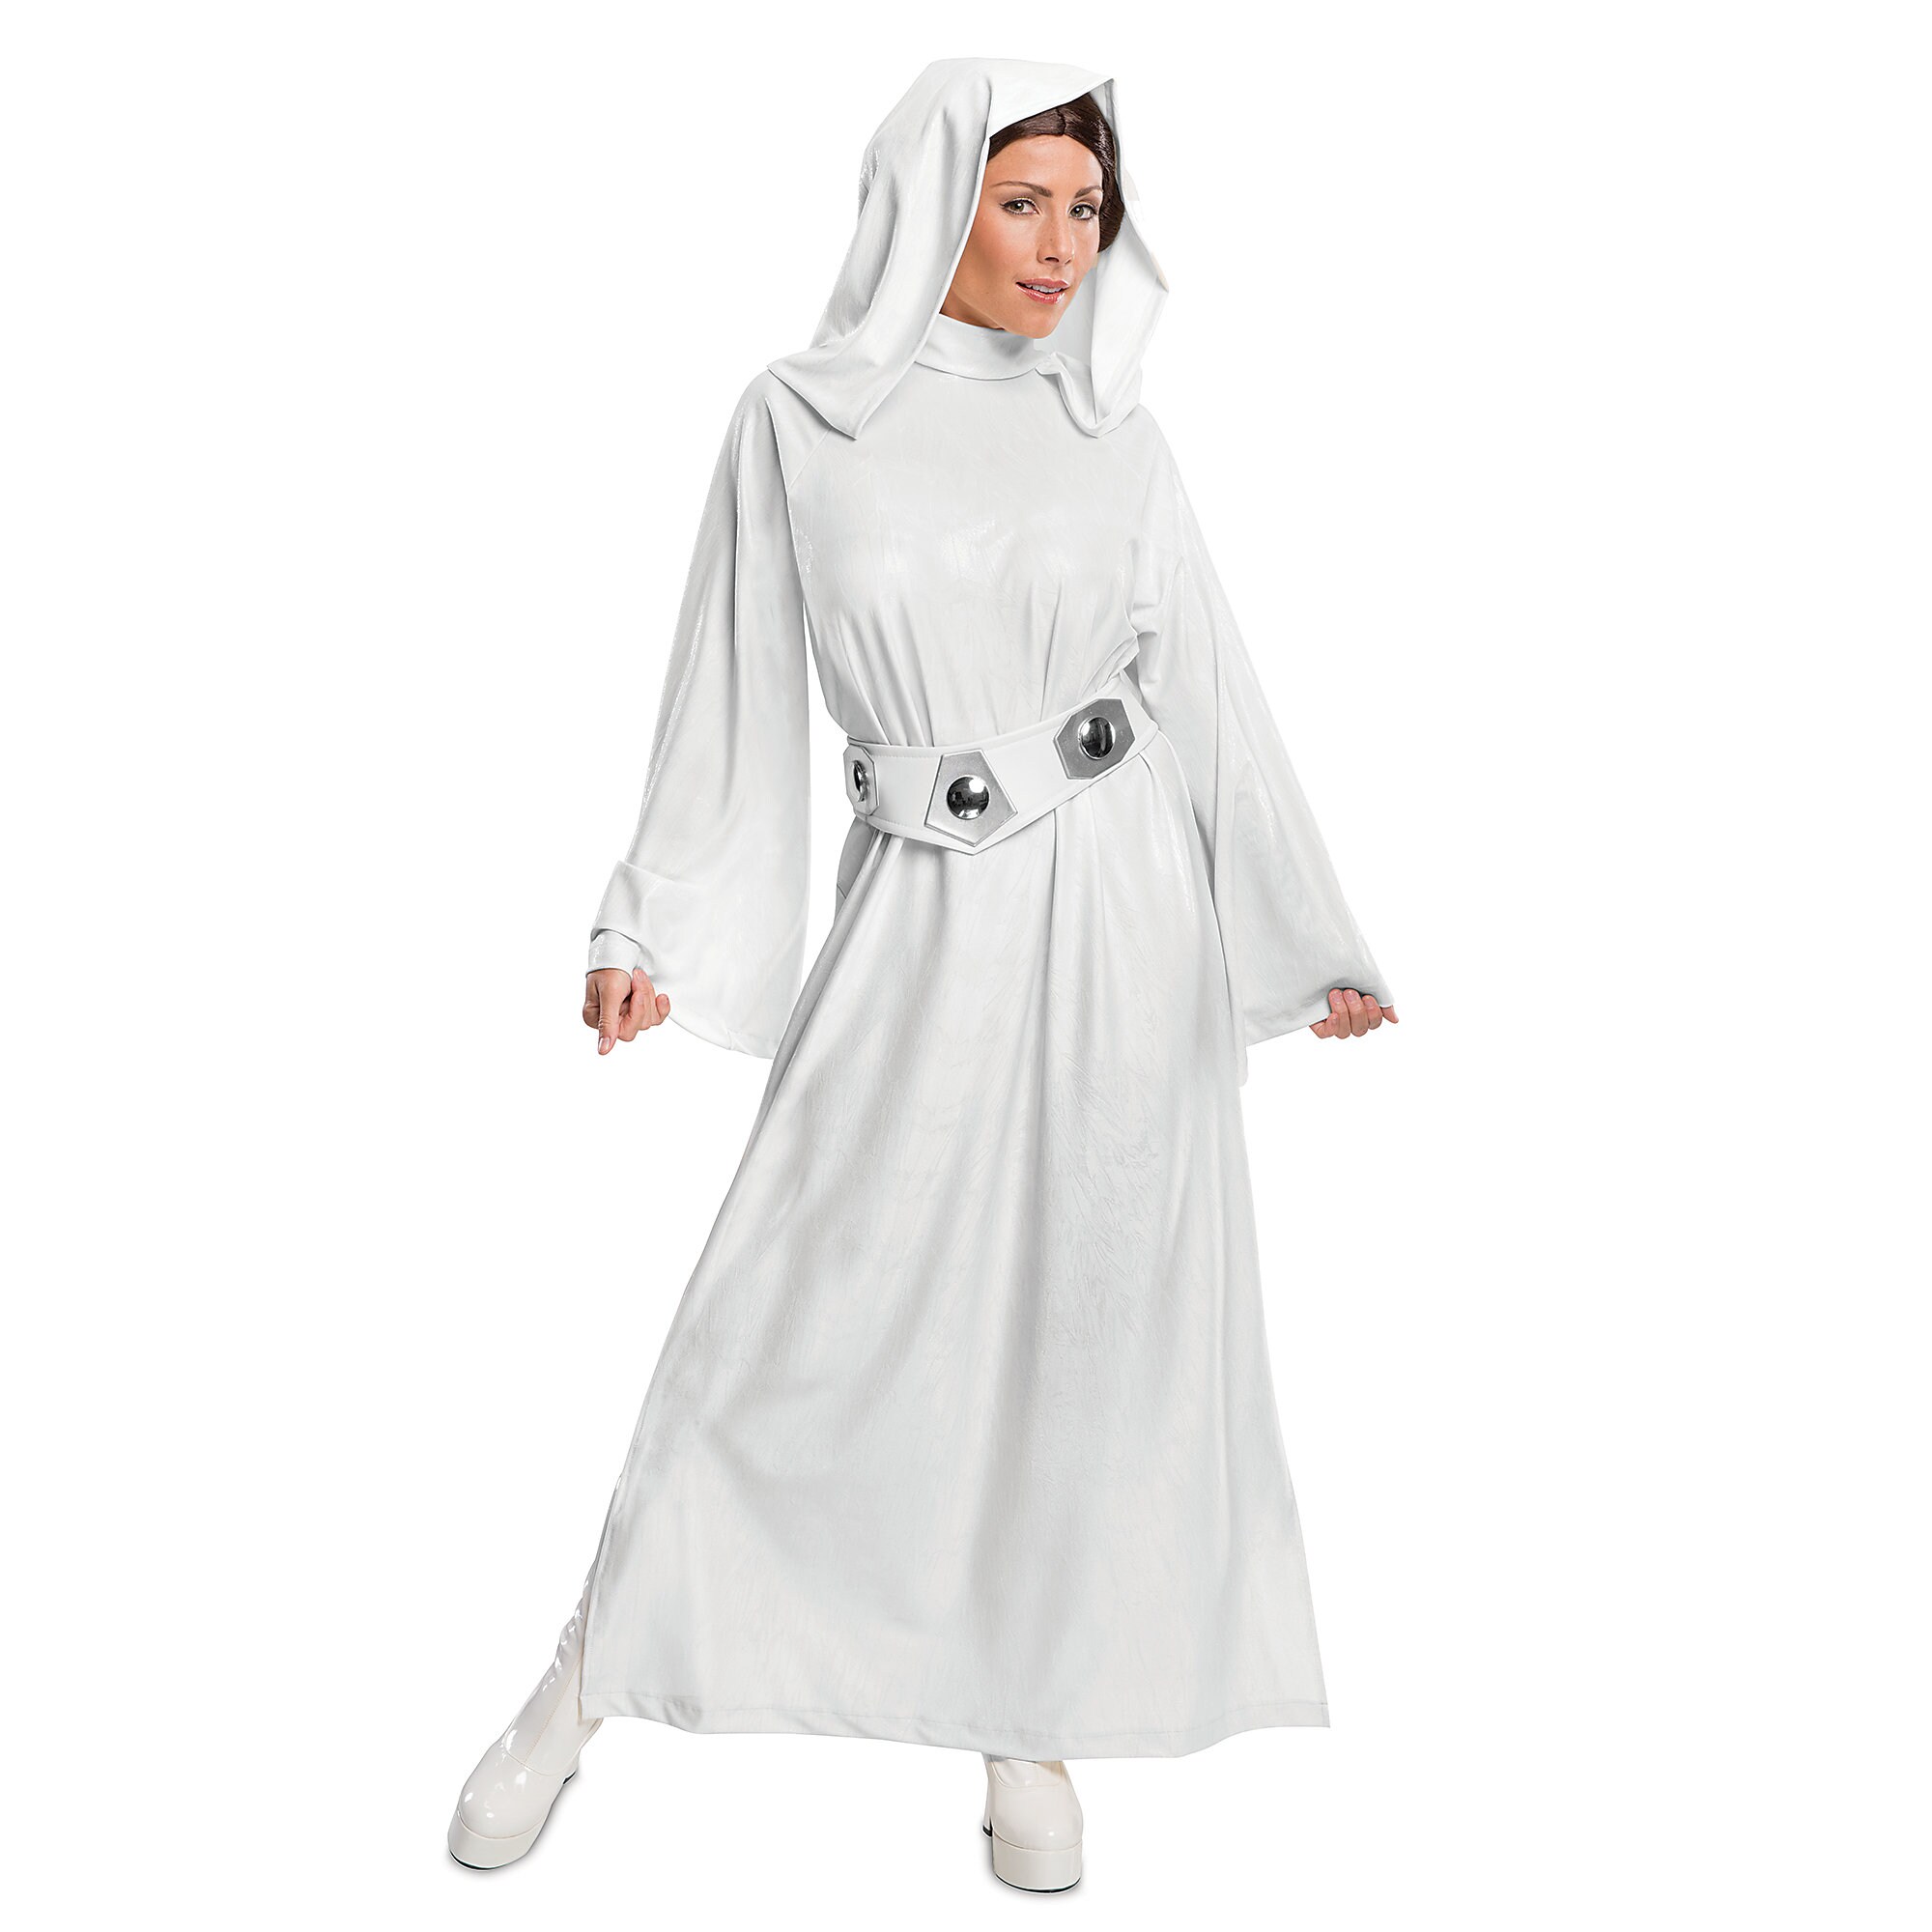 Princess Leia Costume for Adults by Rubie's - Star Wars